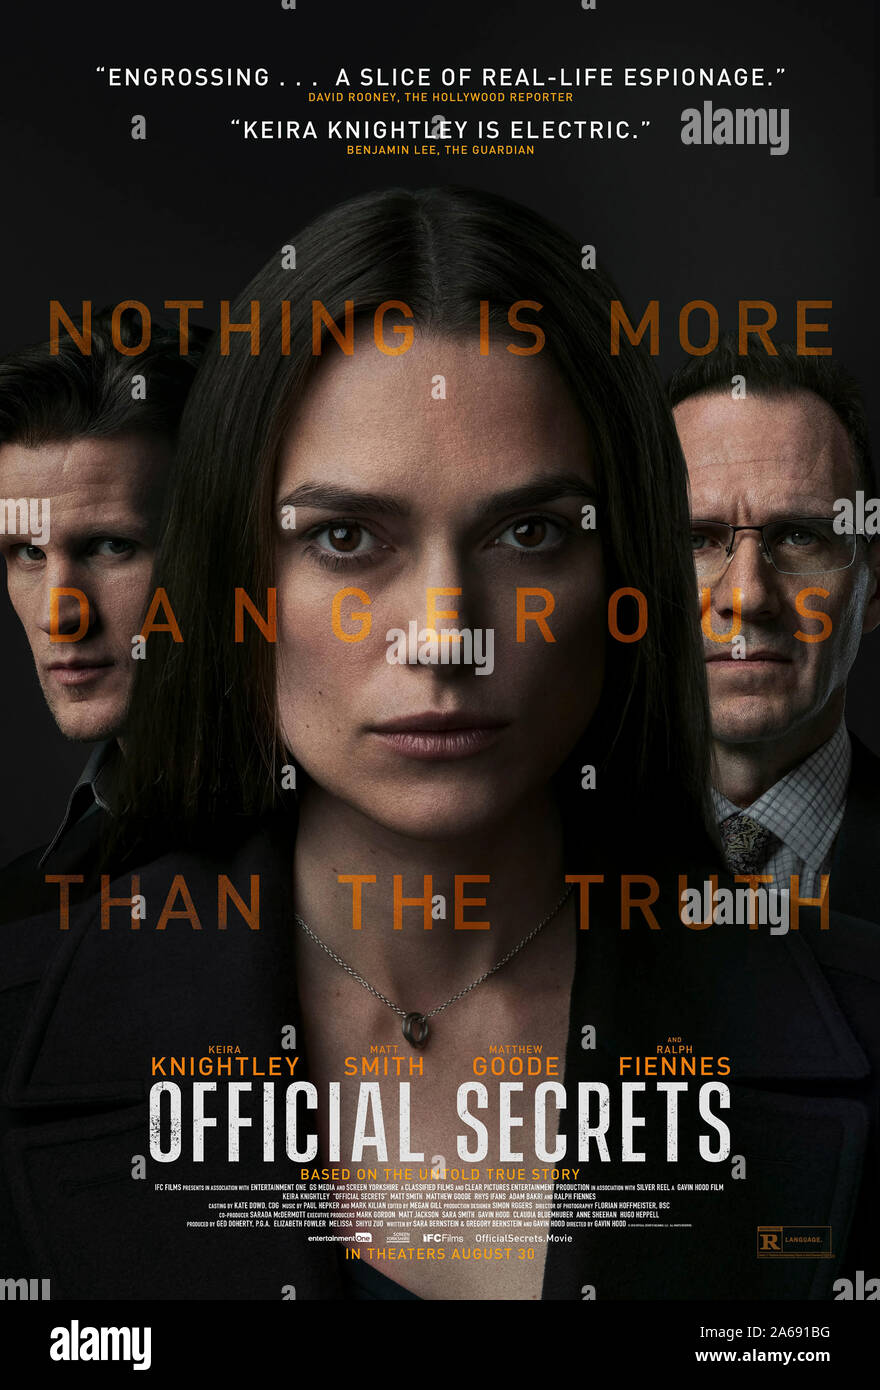 Official Secrets (2019) directed by Gavin Hood and starring Keira Knightley, Matthew Goode, Ralph Fiennes and Matt Smith. True story about a National Security Agency plot in the run up the 2003 invasion of Iraq being leaked to the press. Stock Photo